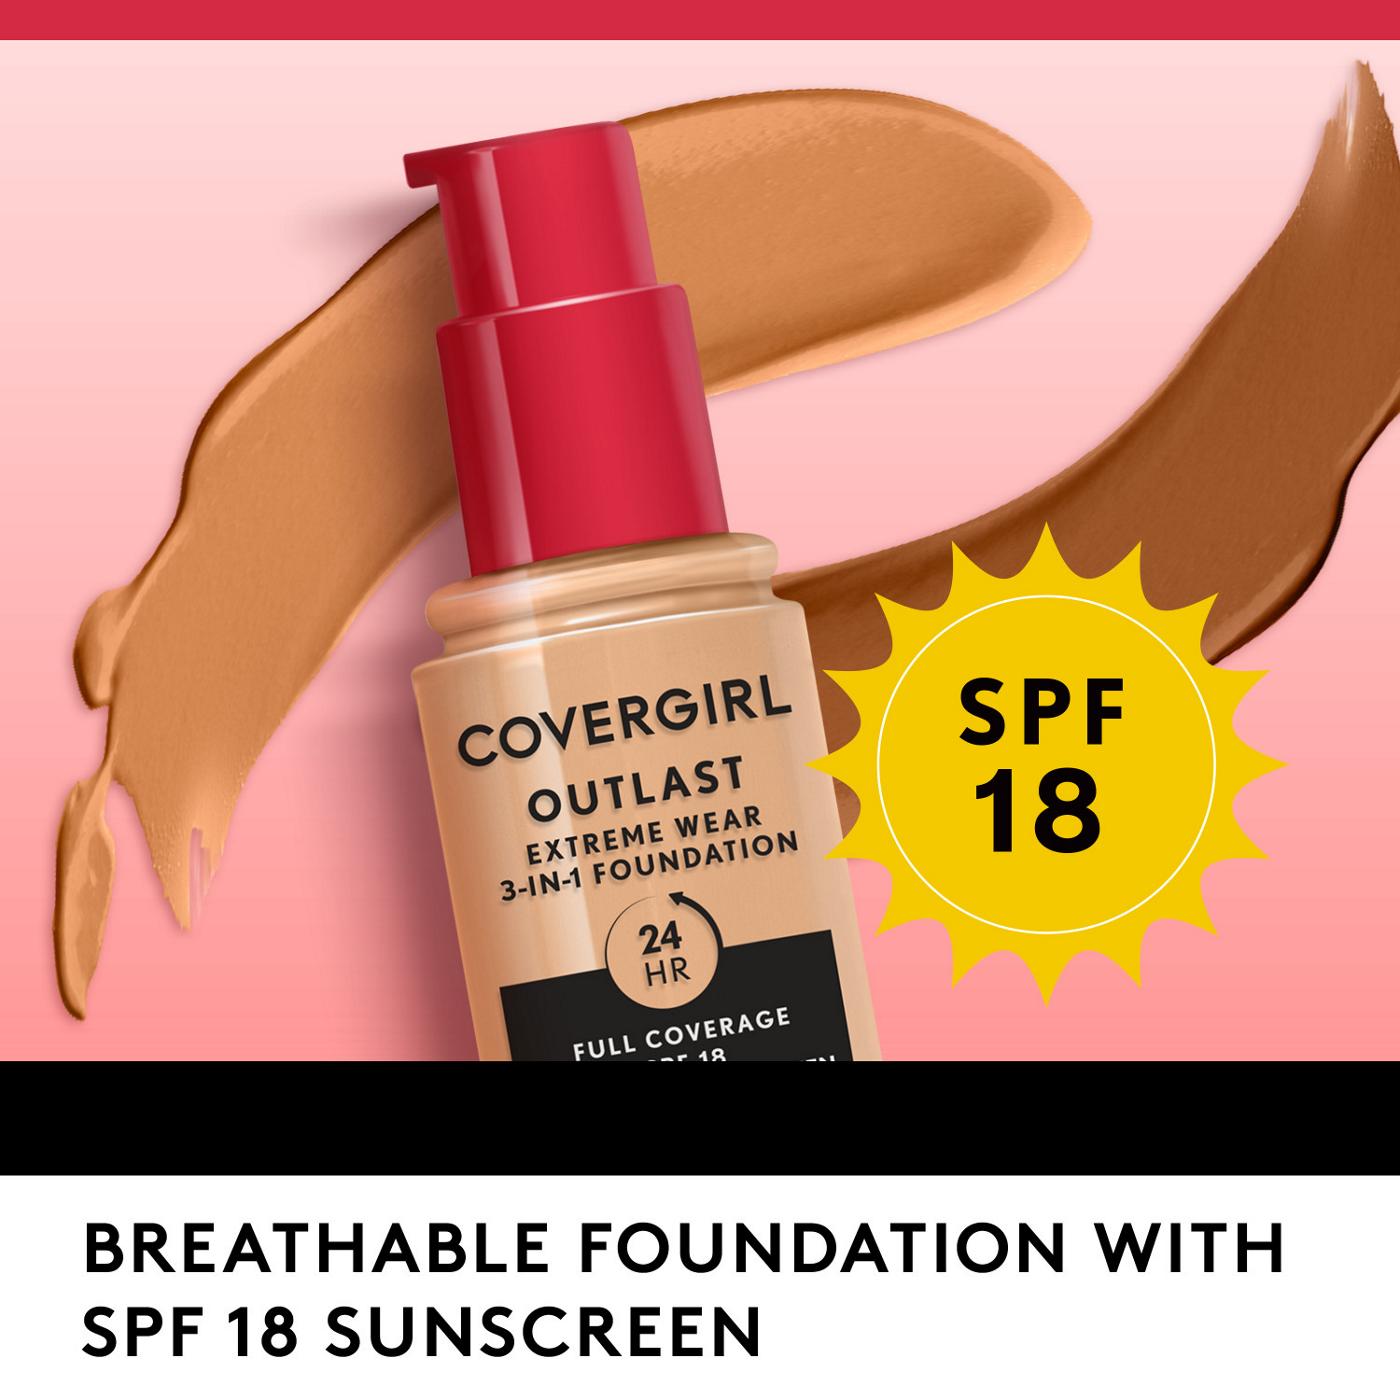 Covergirl Outlast Extreme Wear Liquid Foundation 820 Creamy Natural; image 7 of 11